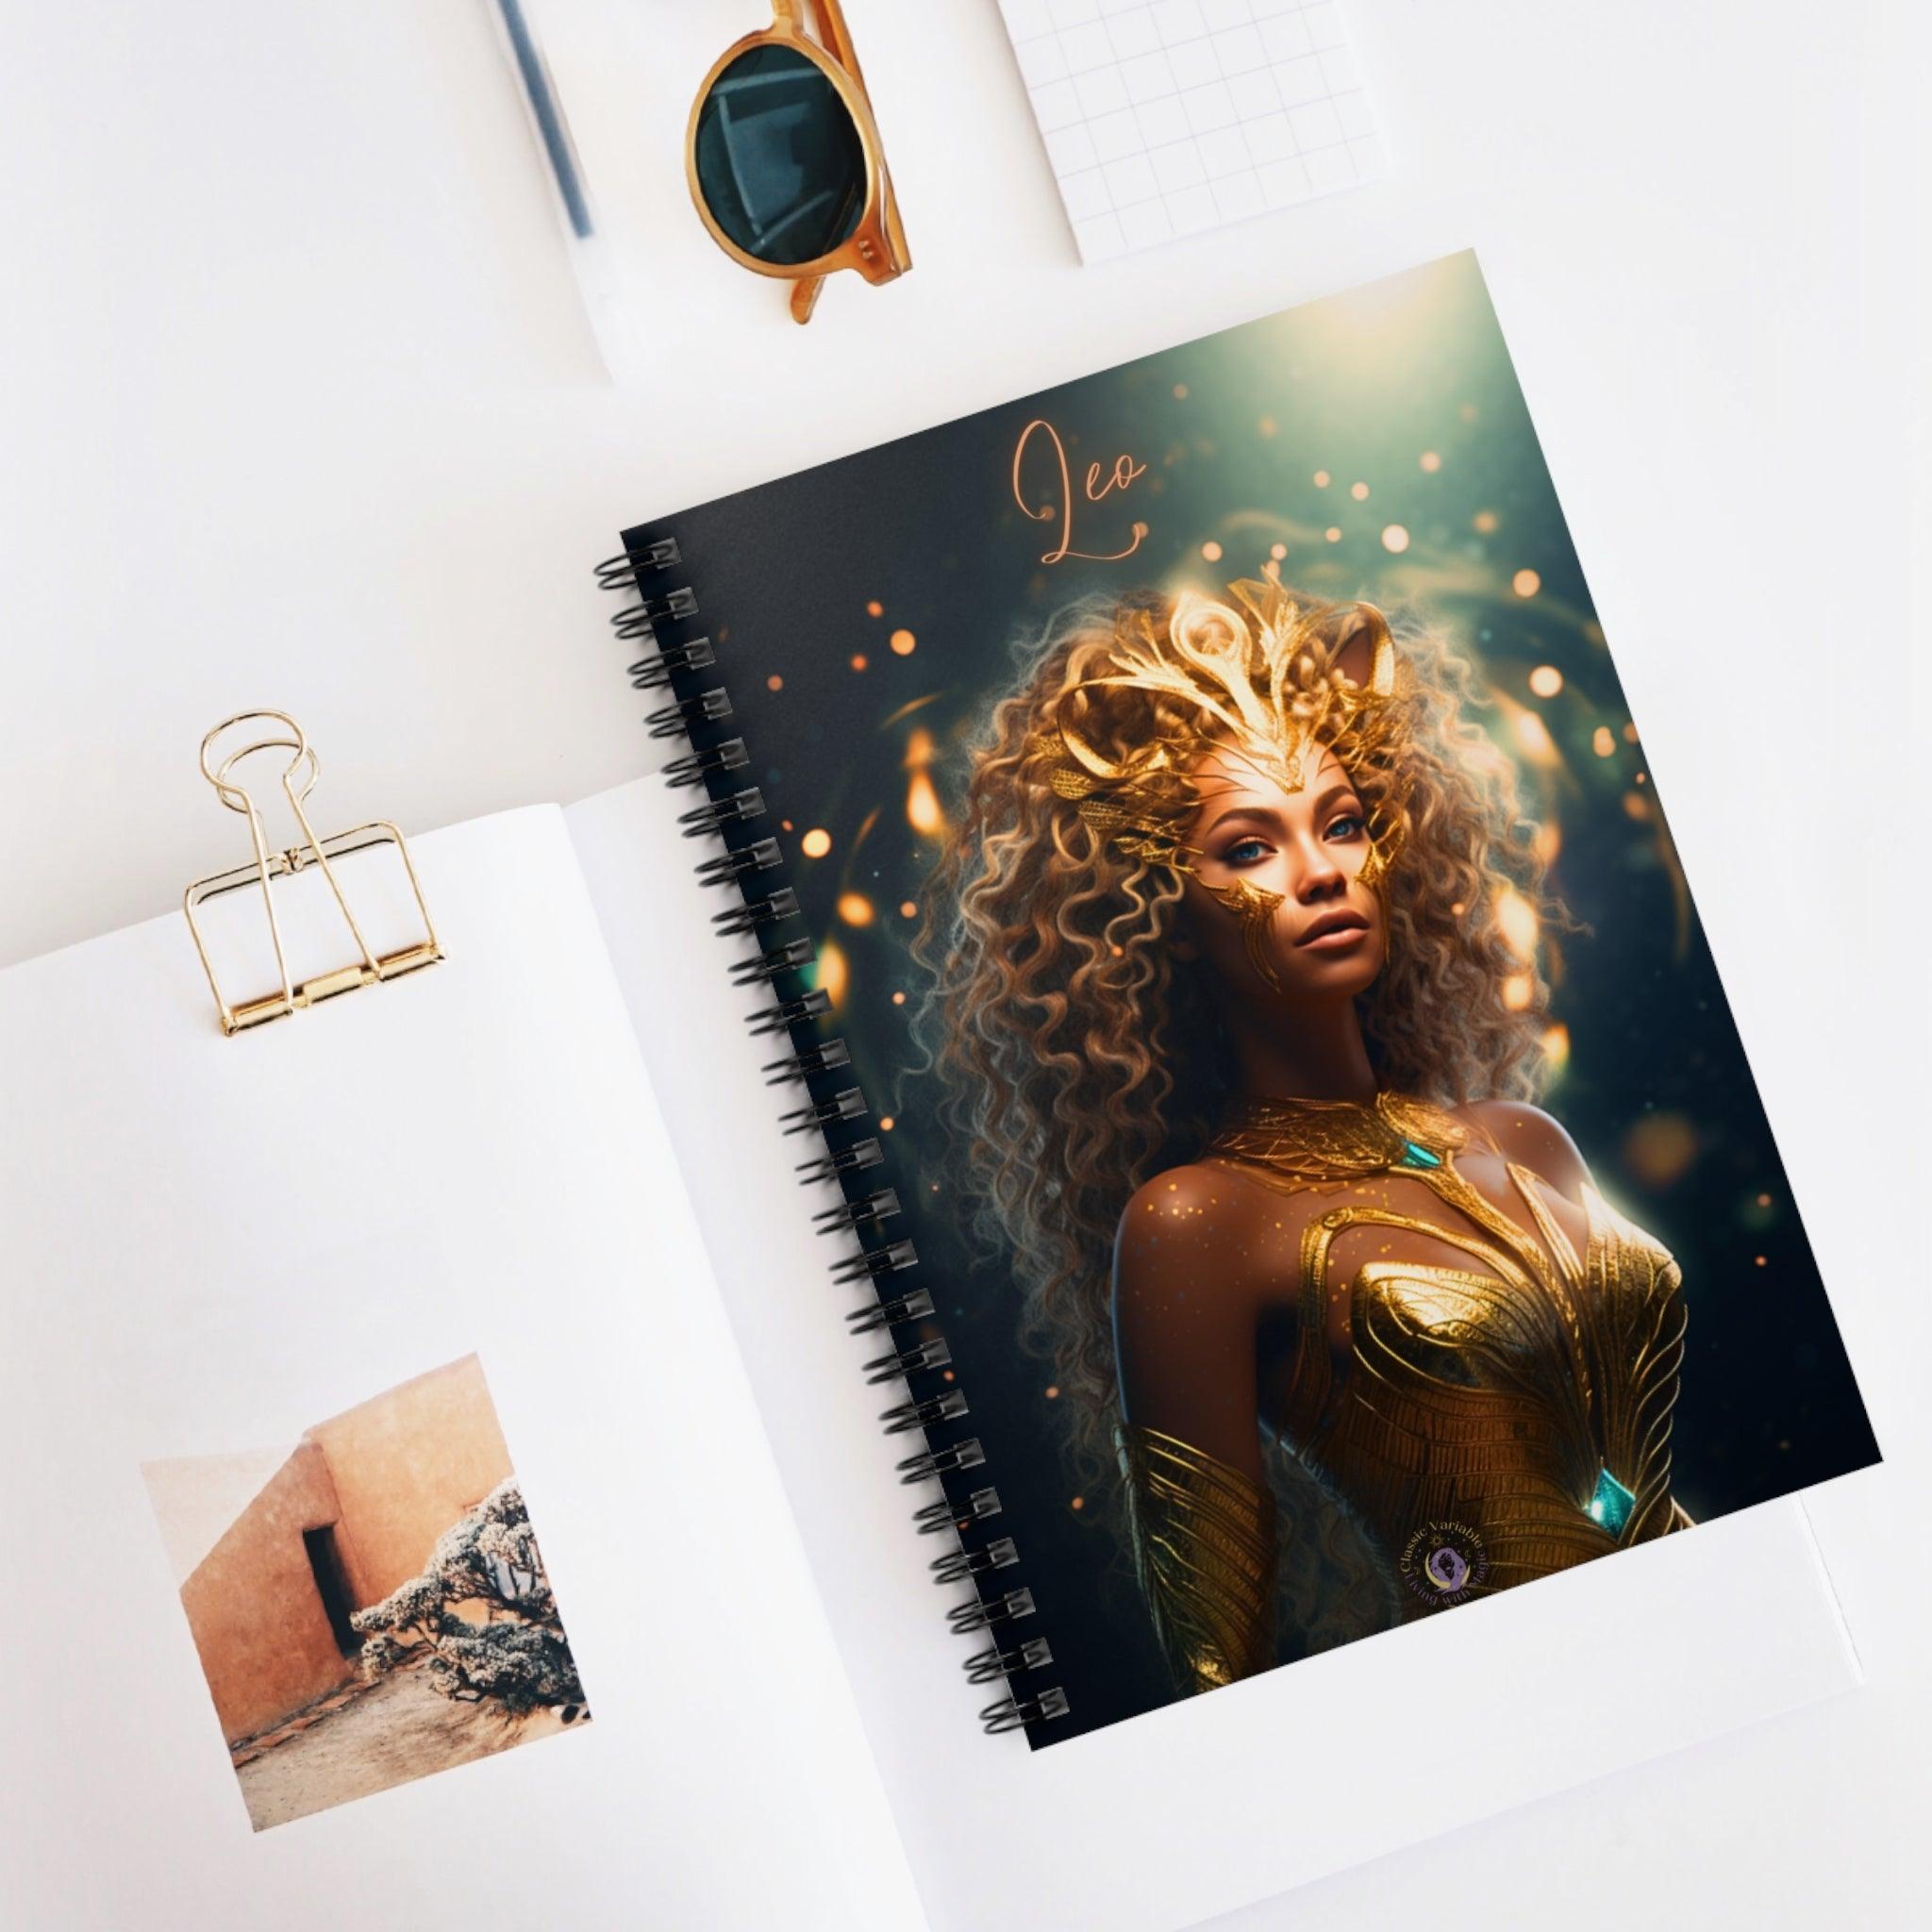 Leo Spiral Notebook - Ruled Line - Classic Variable